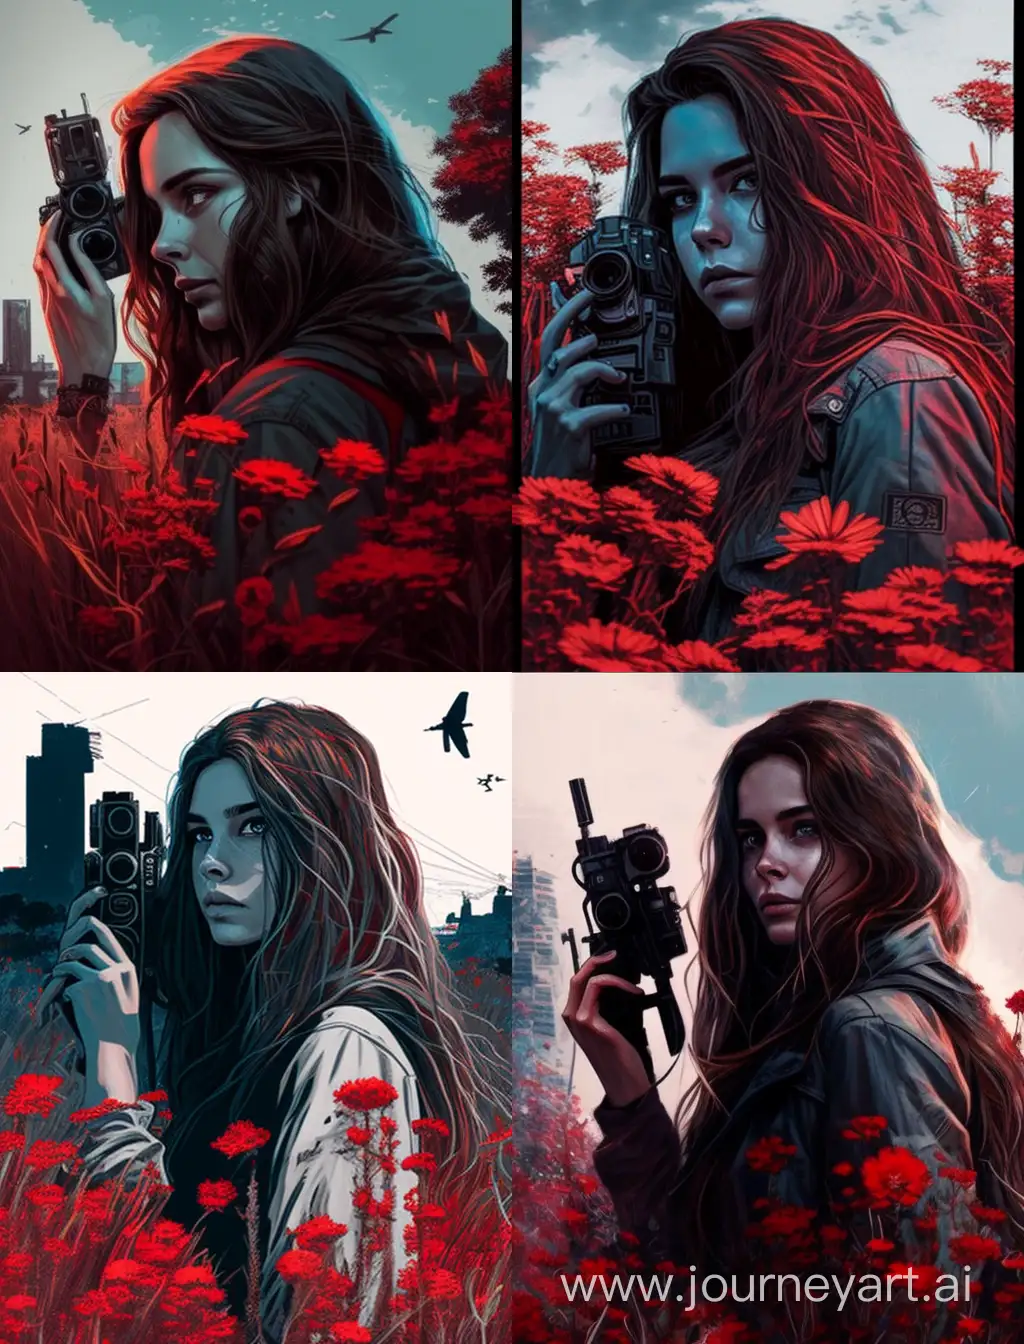 A woman with a camera, looking at a ghost standing in a field of red flowers in a cyberpunk city, lonely feeling, the woman has long brown hair and blue eyes